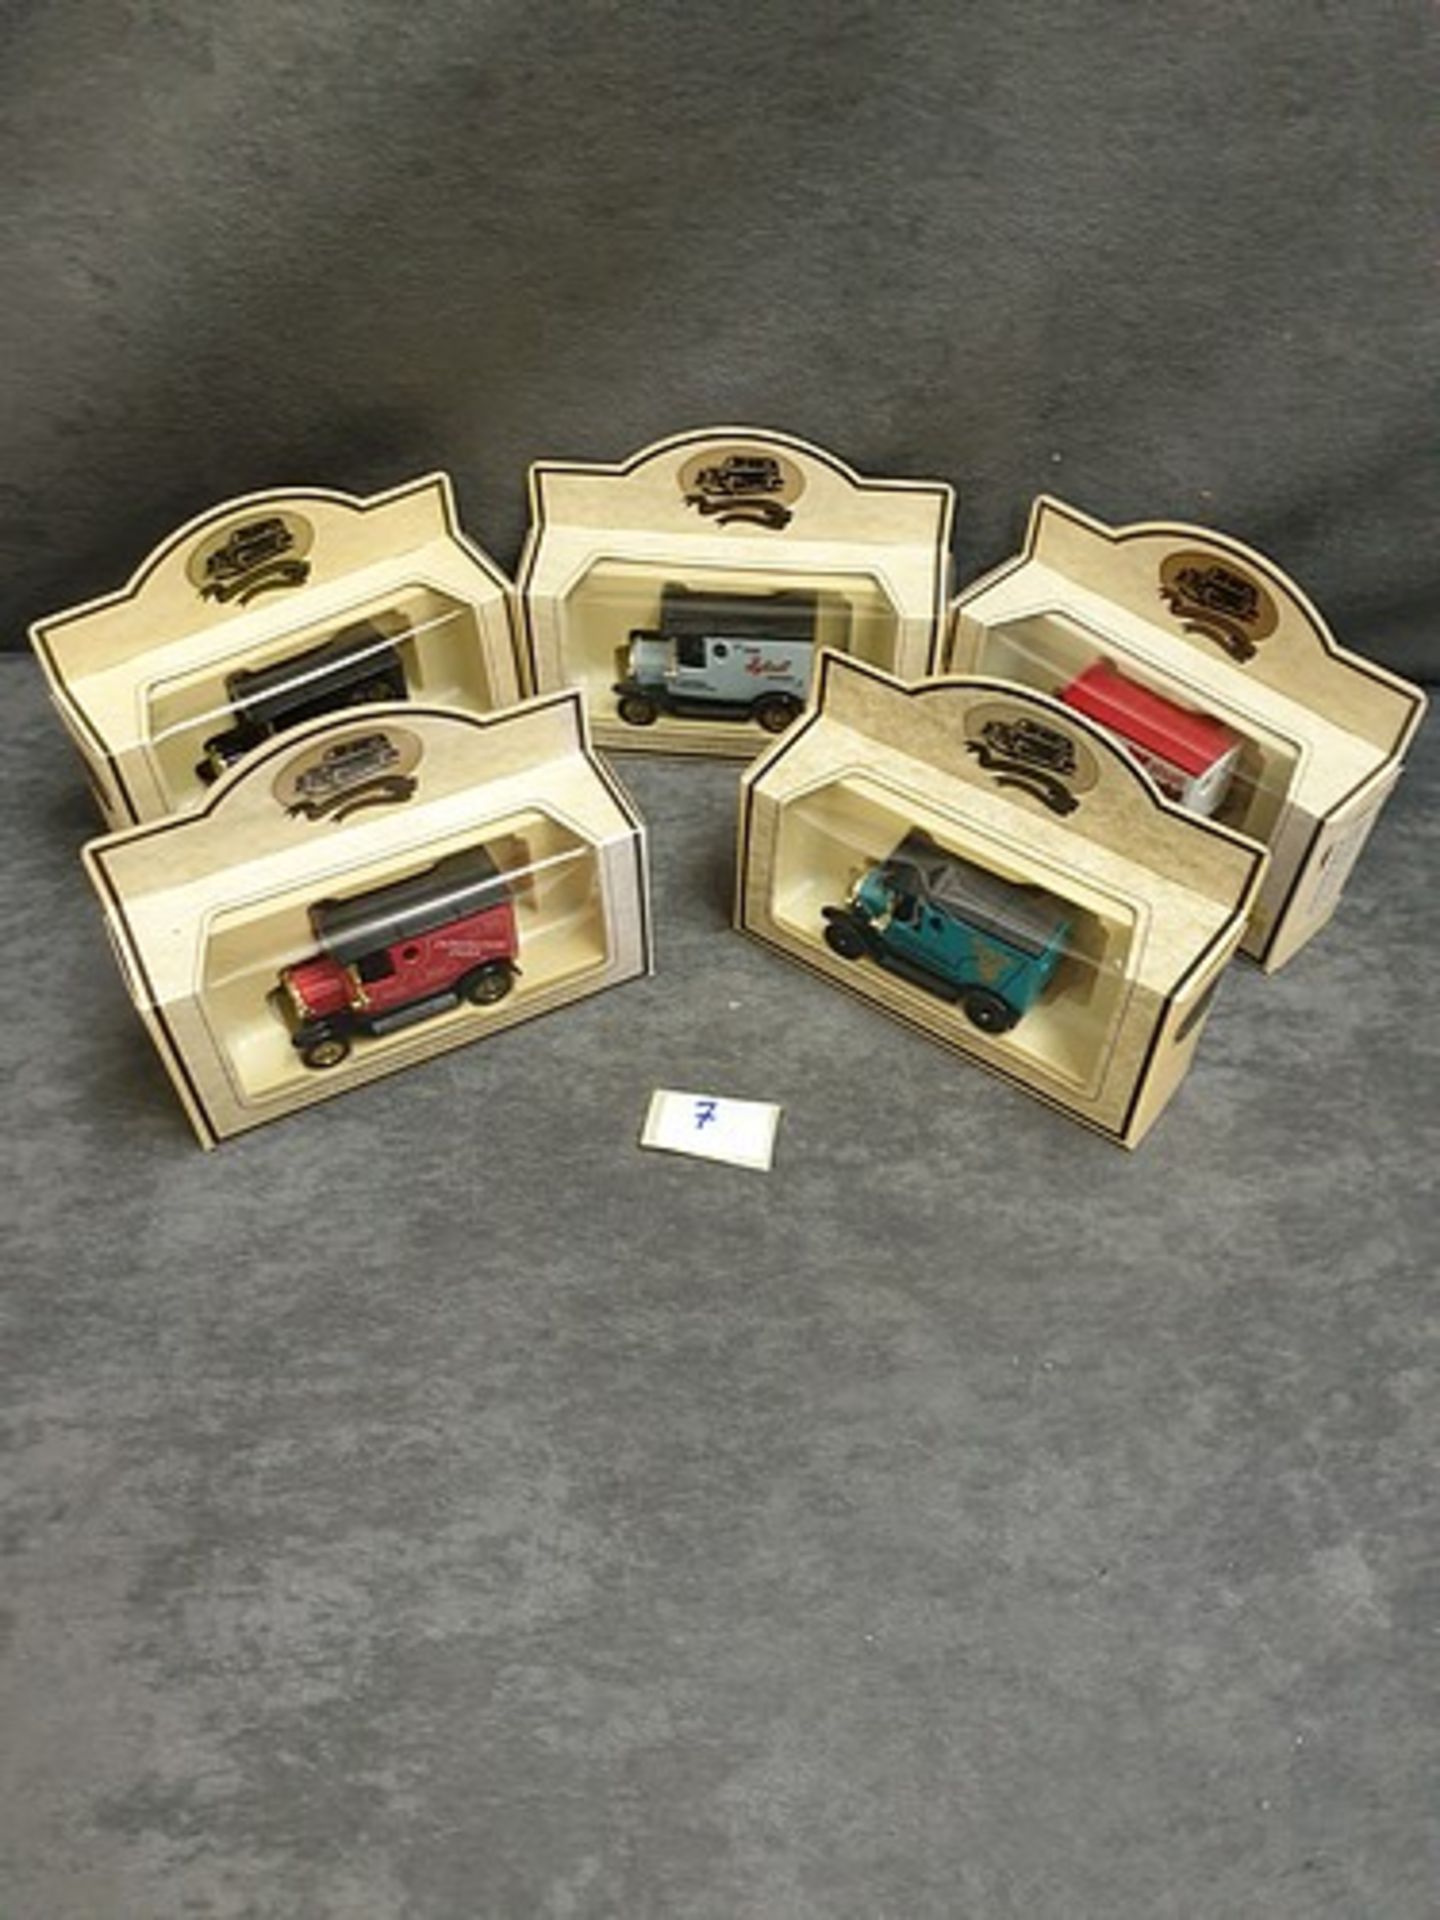 5x Lledo Diecast Vehicles Individually Boxed Advertising Stoneleigh Toy Extravaganza / Walsall